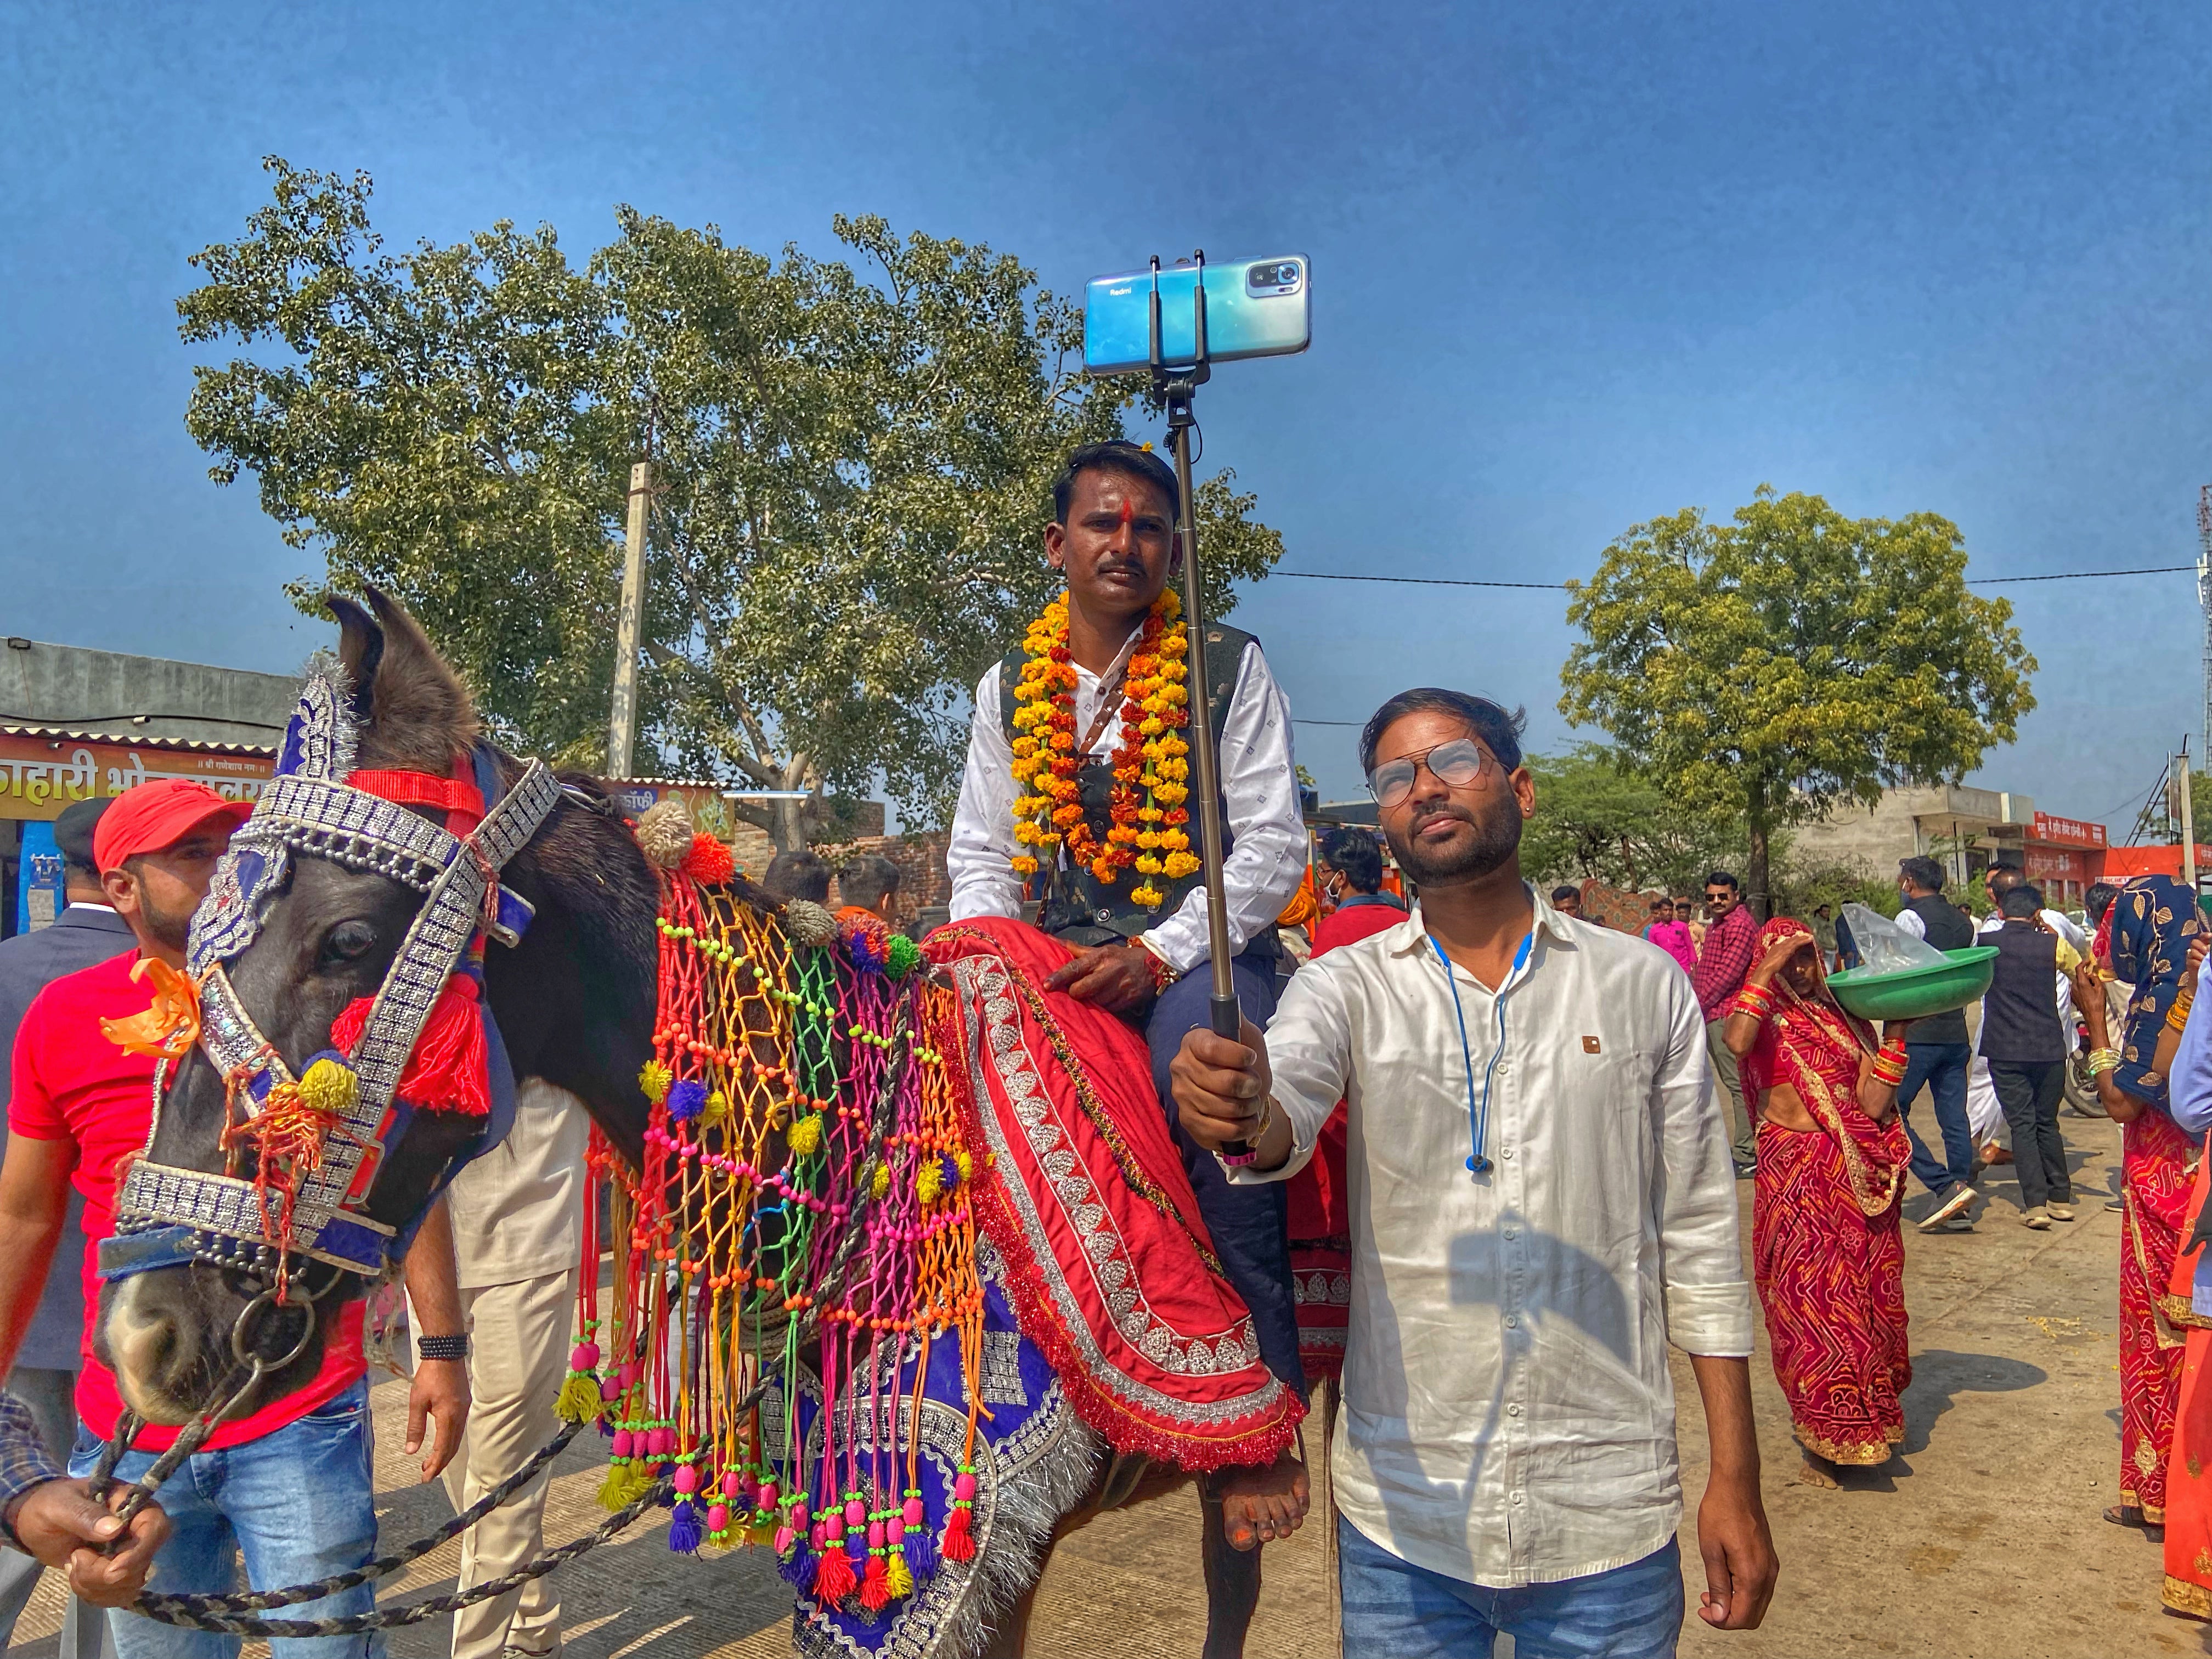 Manoj Bairwa, a Dalit man from Rajasthan breaks the taboo and rides a horse for his wedding, an act that has often led to violence from upper caste groups